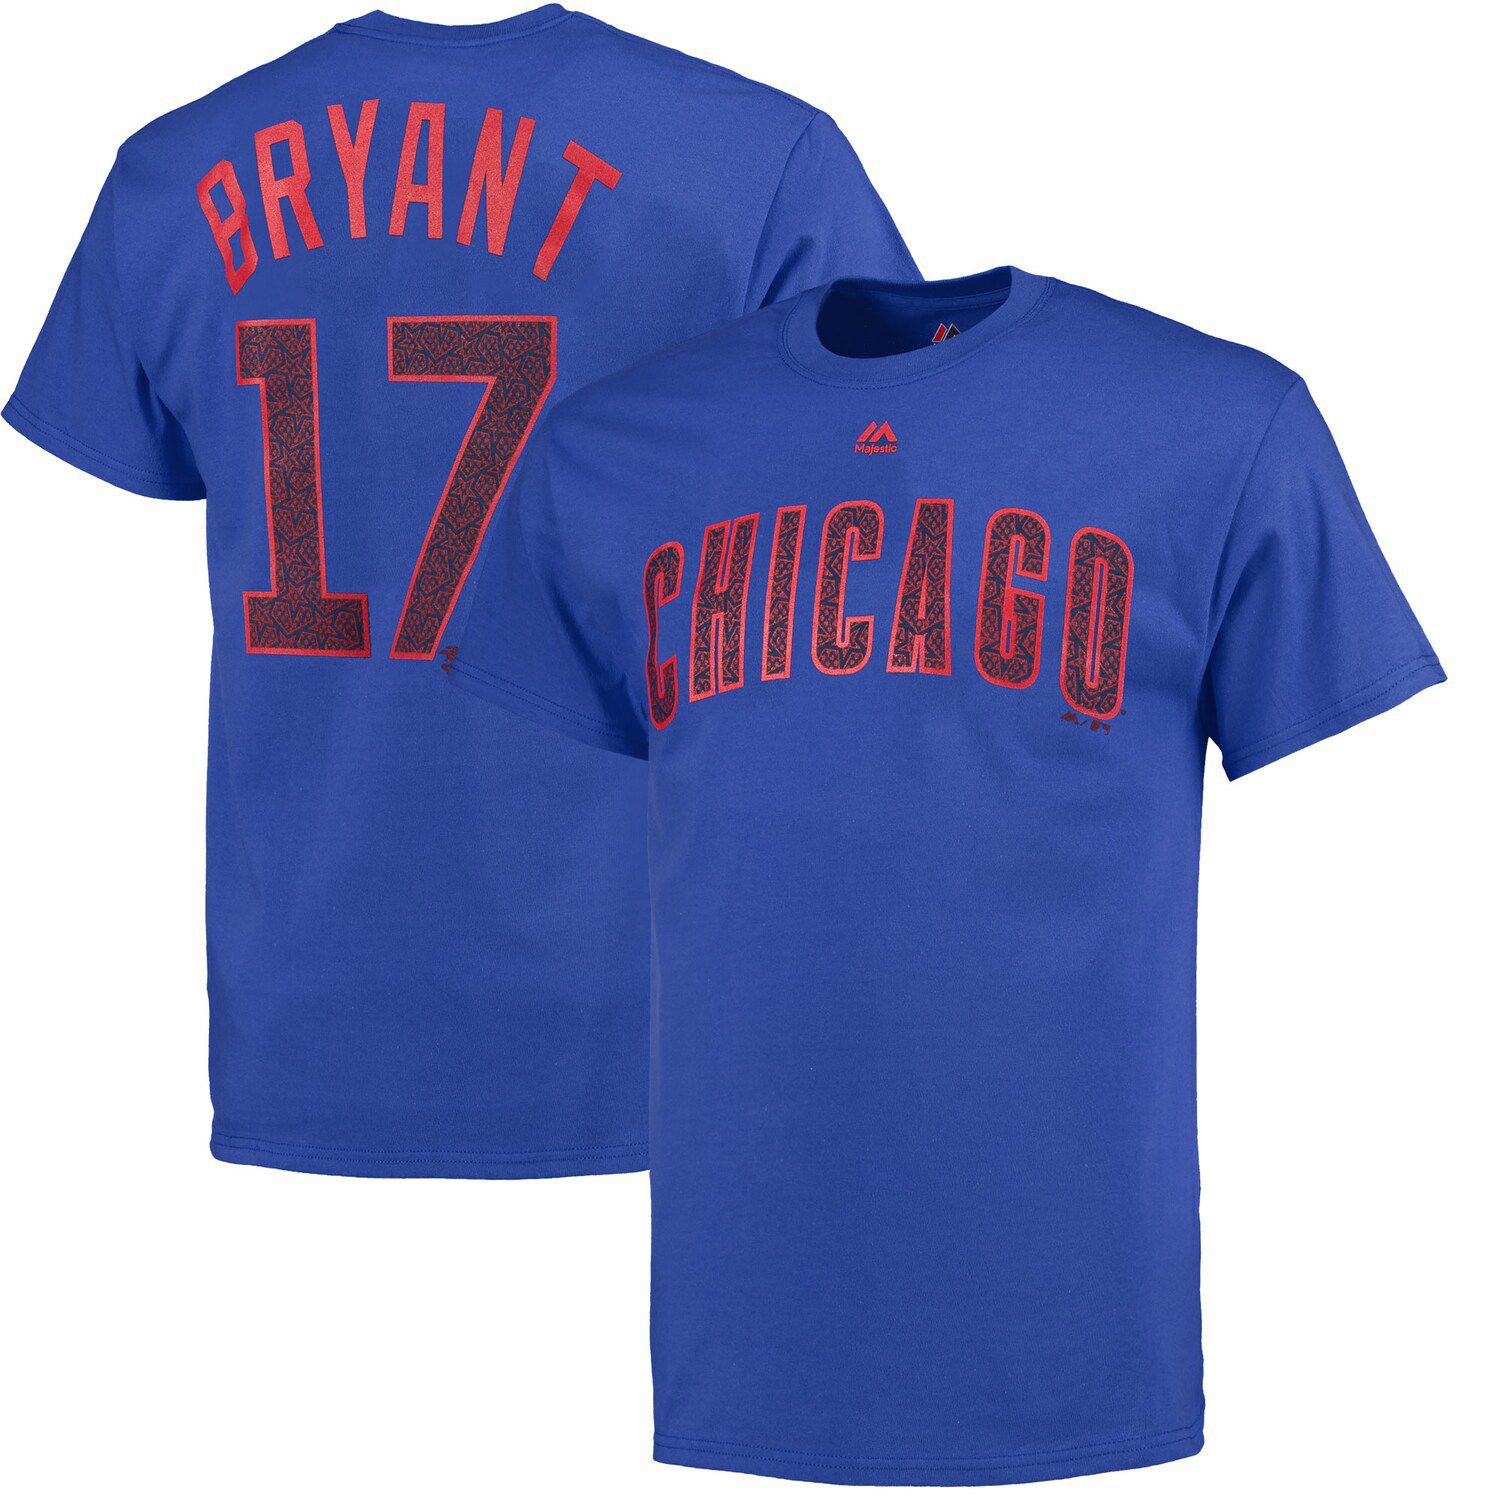 cubs stars and stripes jersey